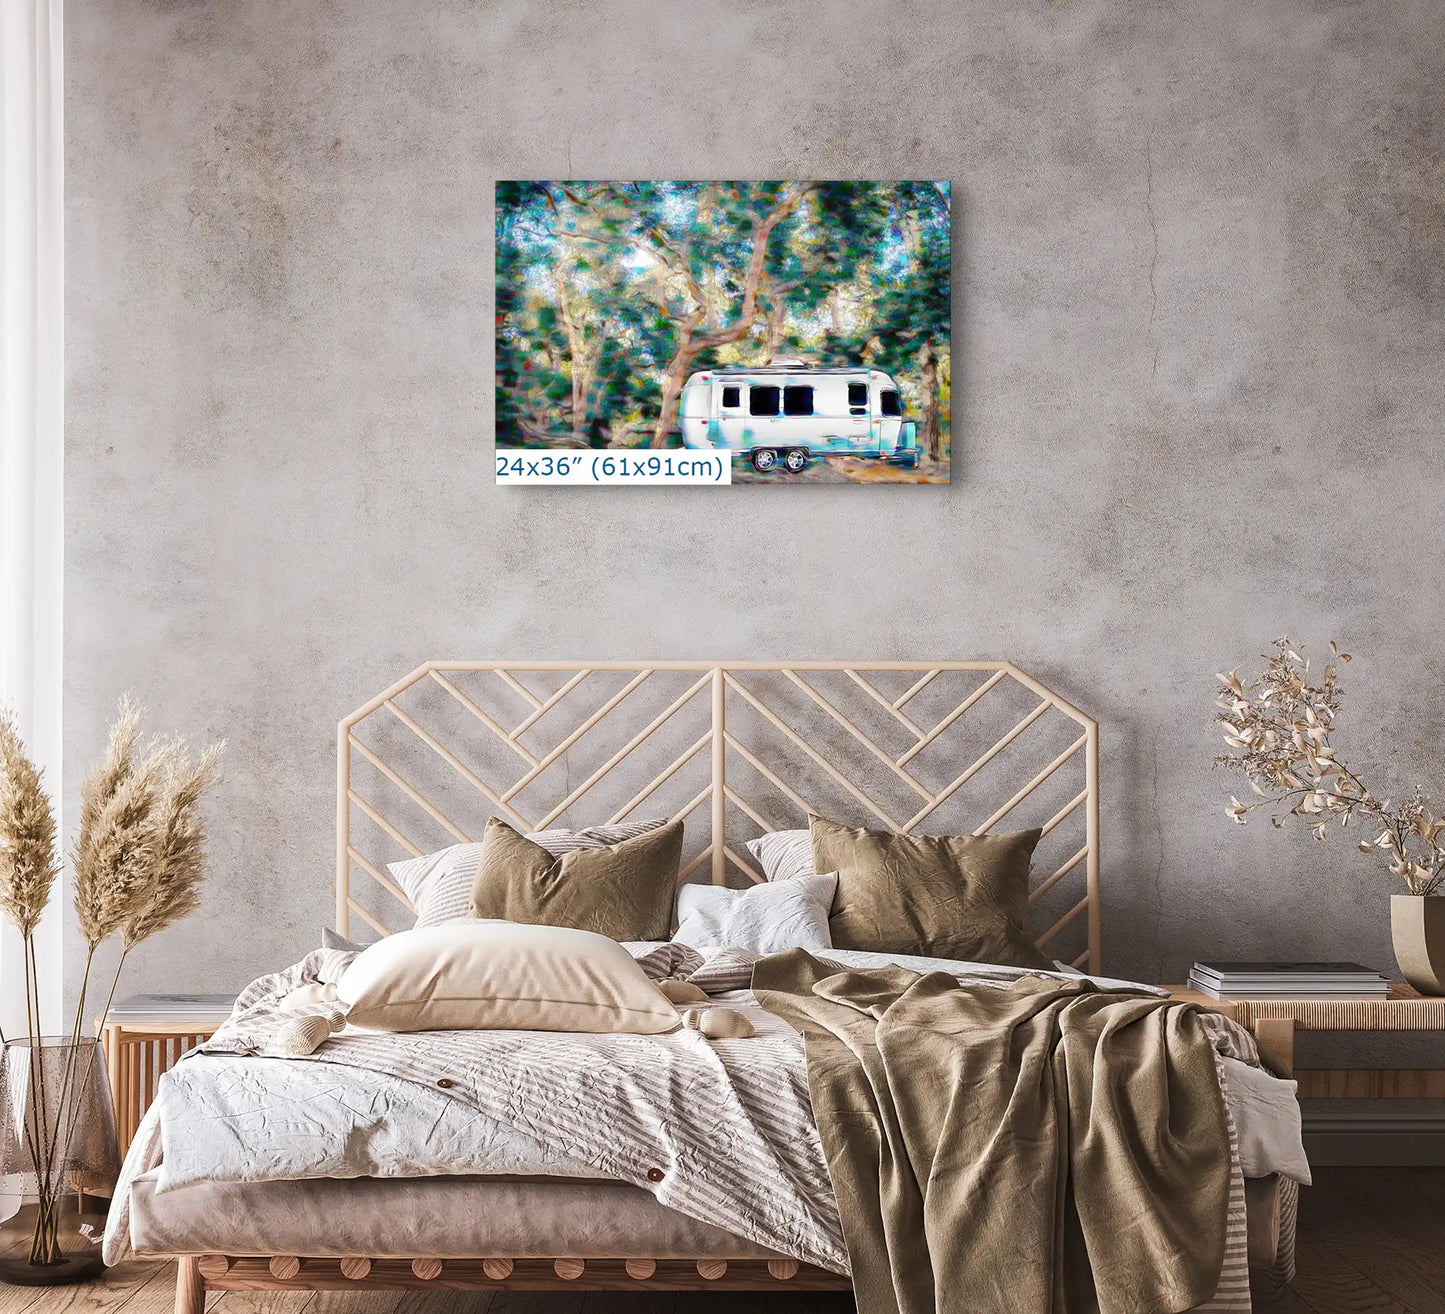 Airstream Under a Coast Live Oak Tree art in 24x36-inches over bed